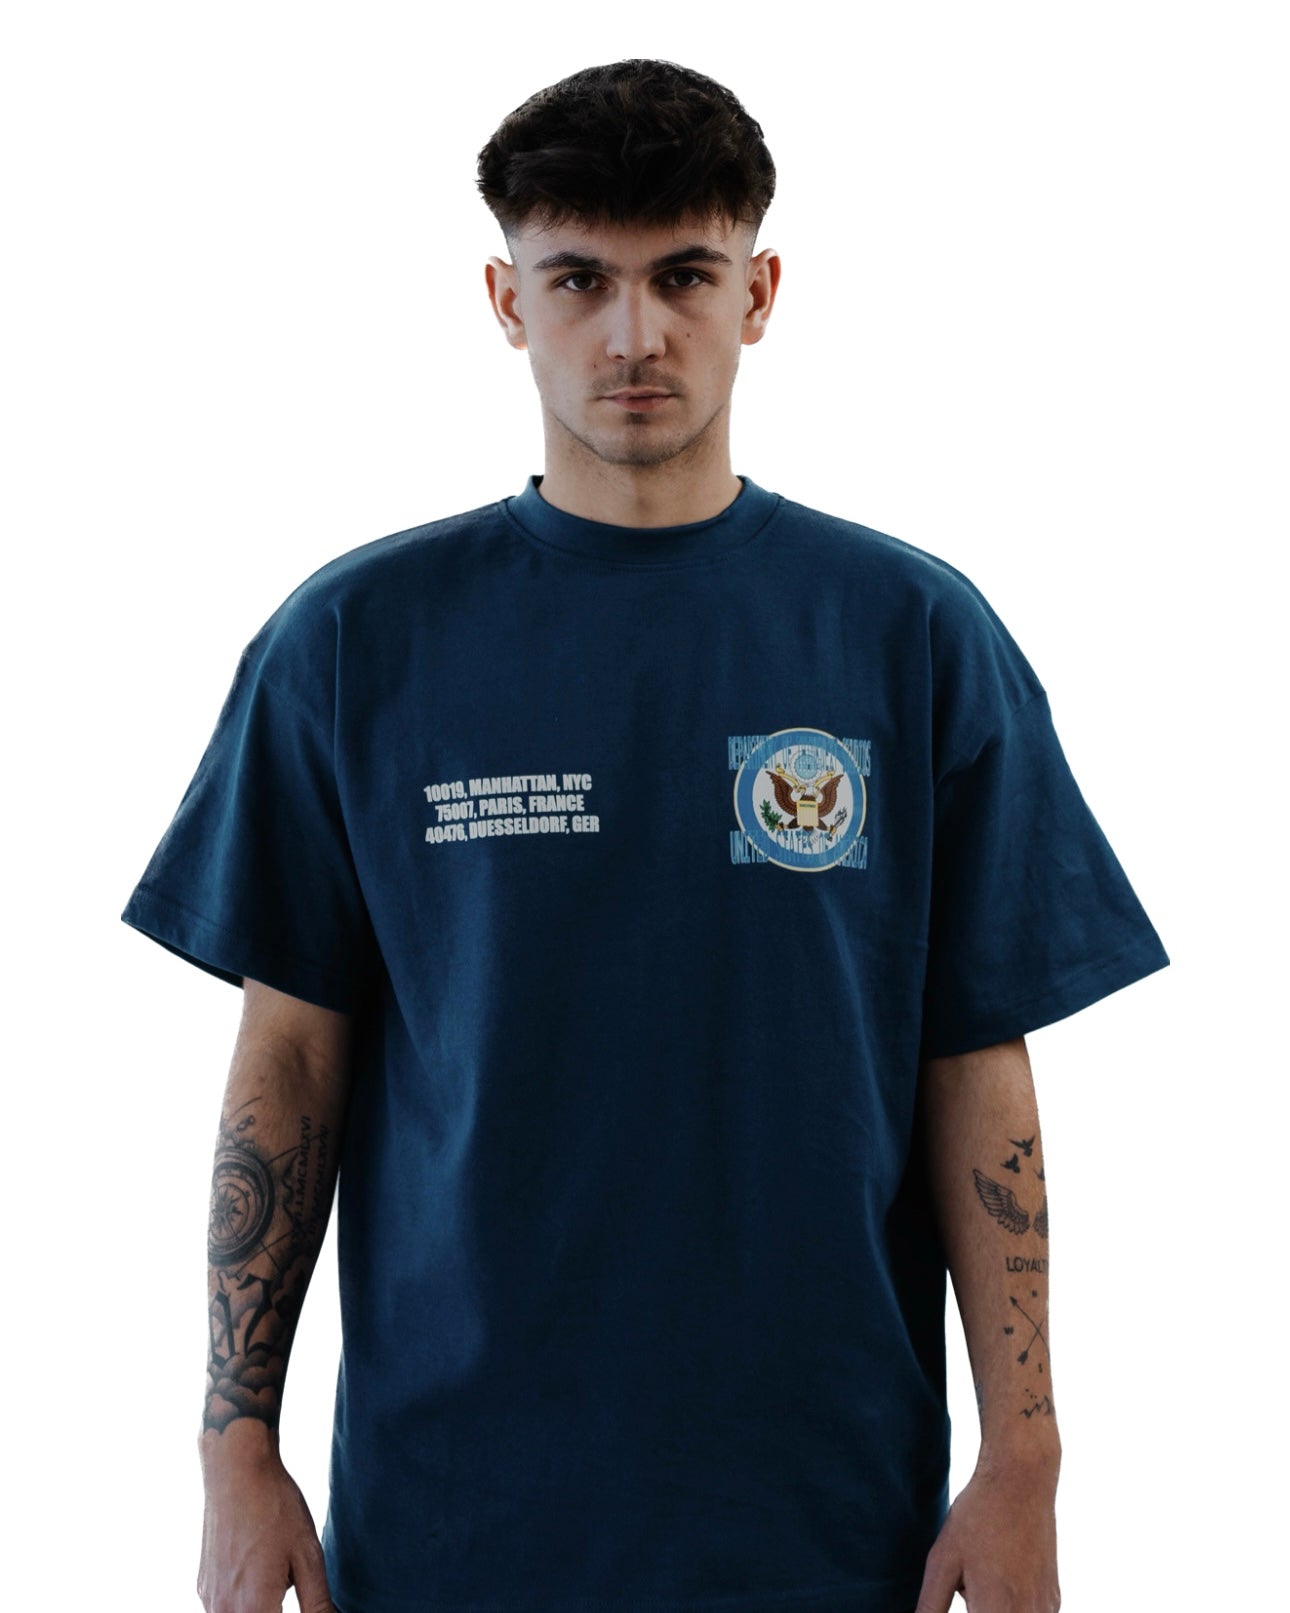 THNXT NYC DEPARTMENT TEE